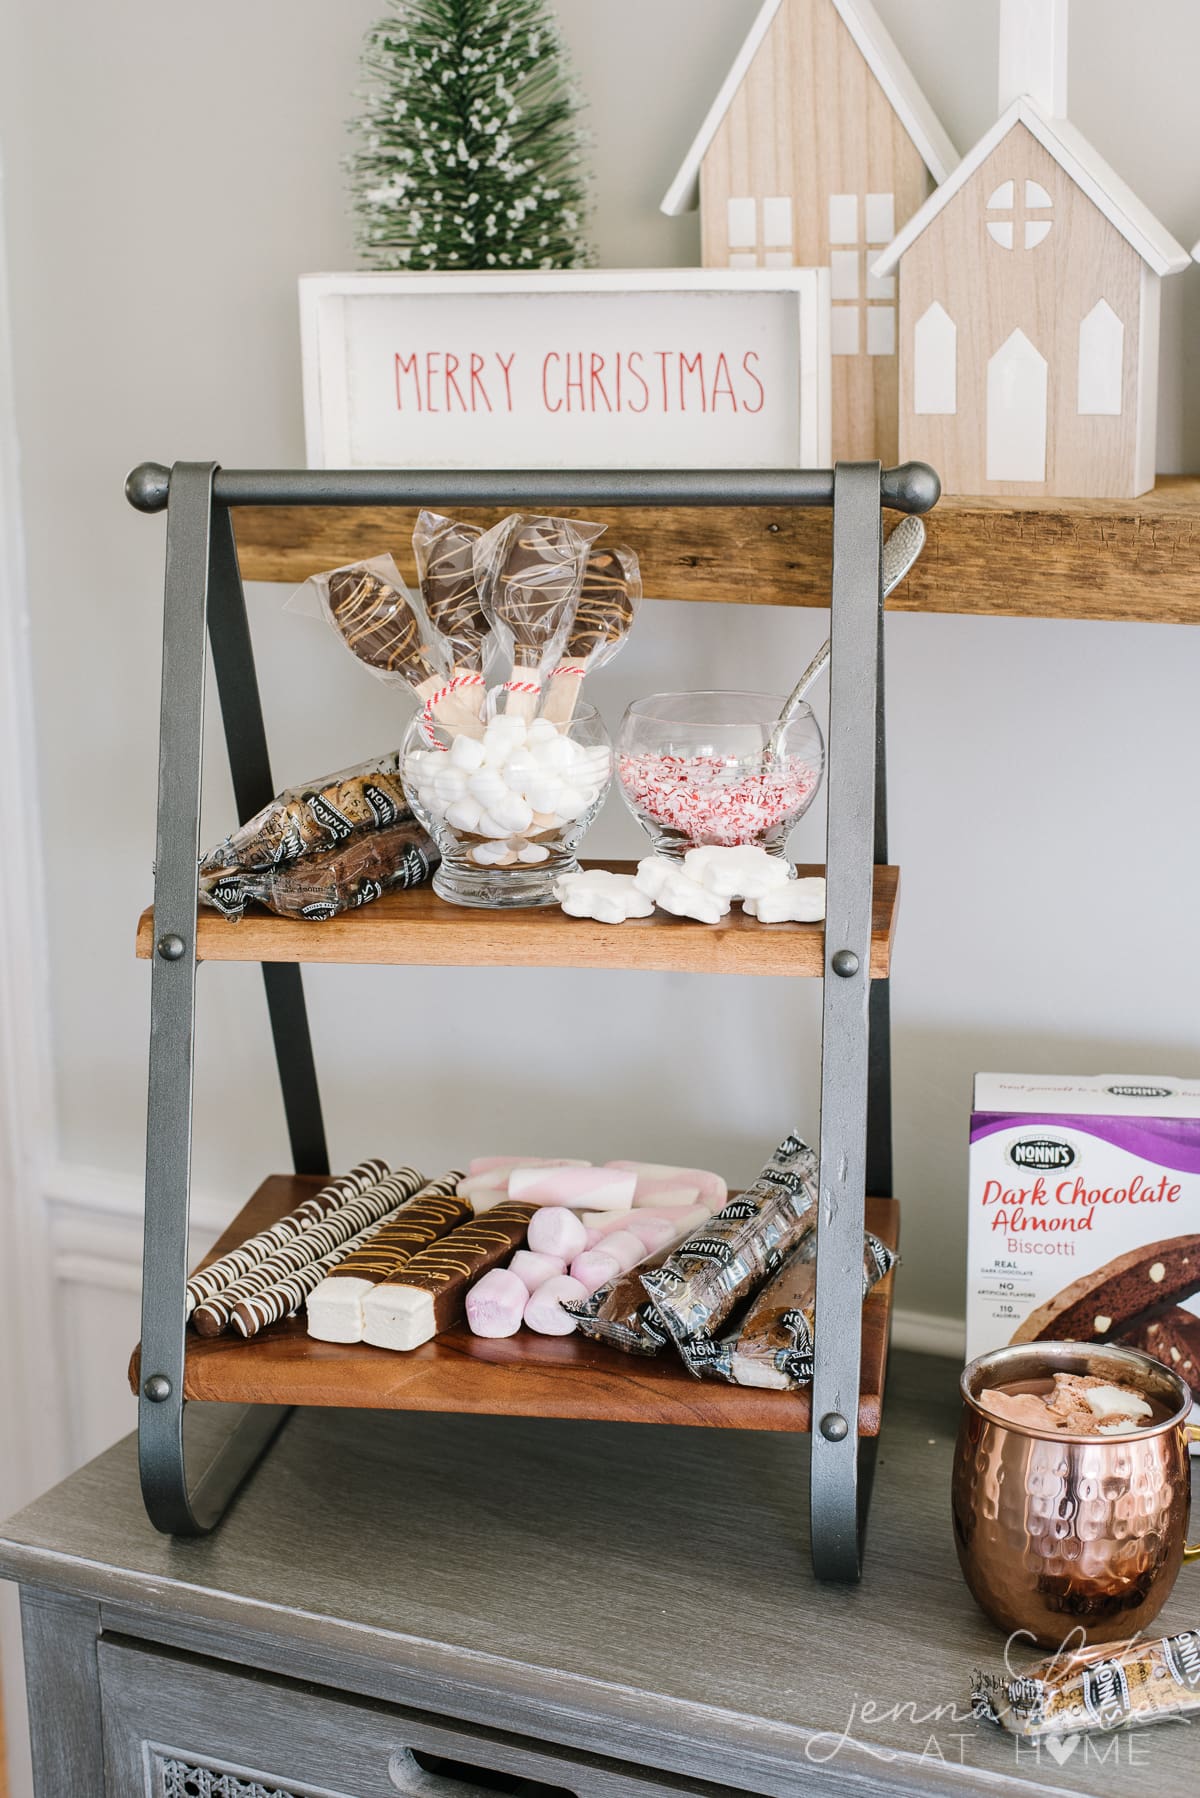 Tiered stand filled with marshmallows, chocolate stir spoons and other hot cocoa accompiments